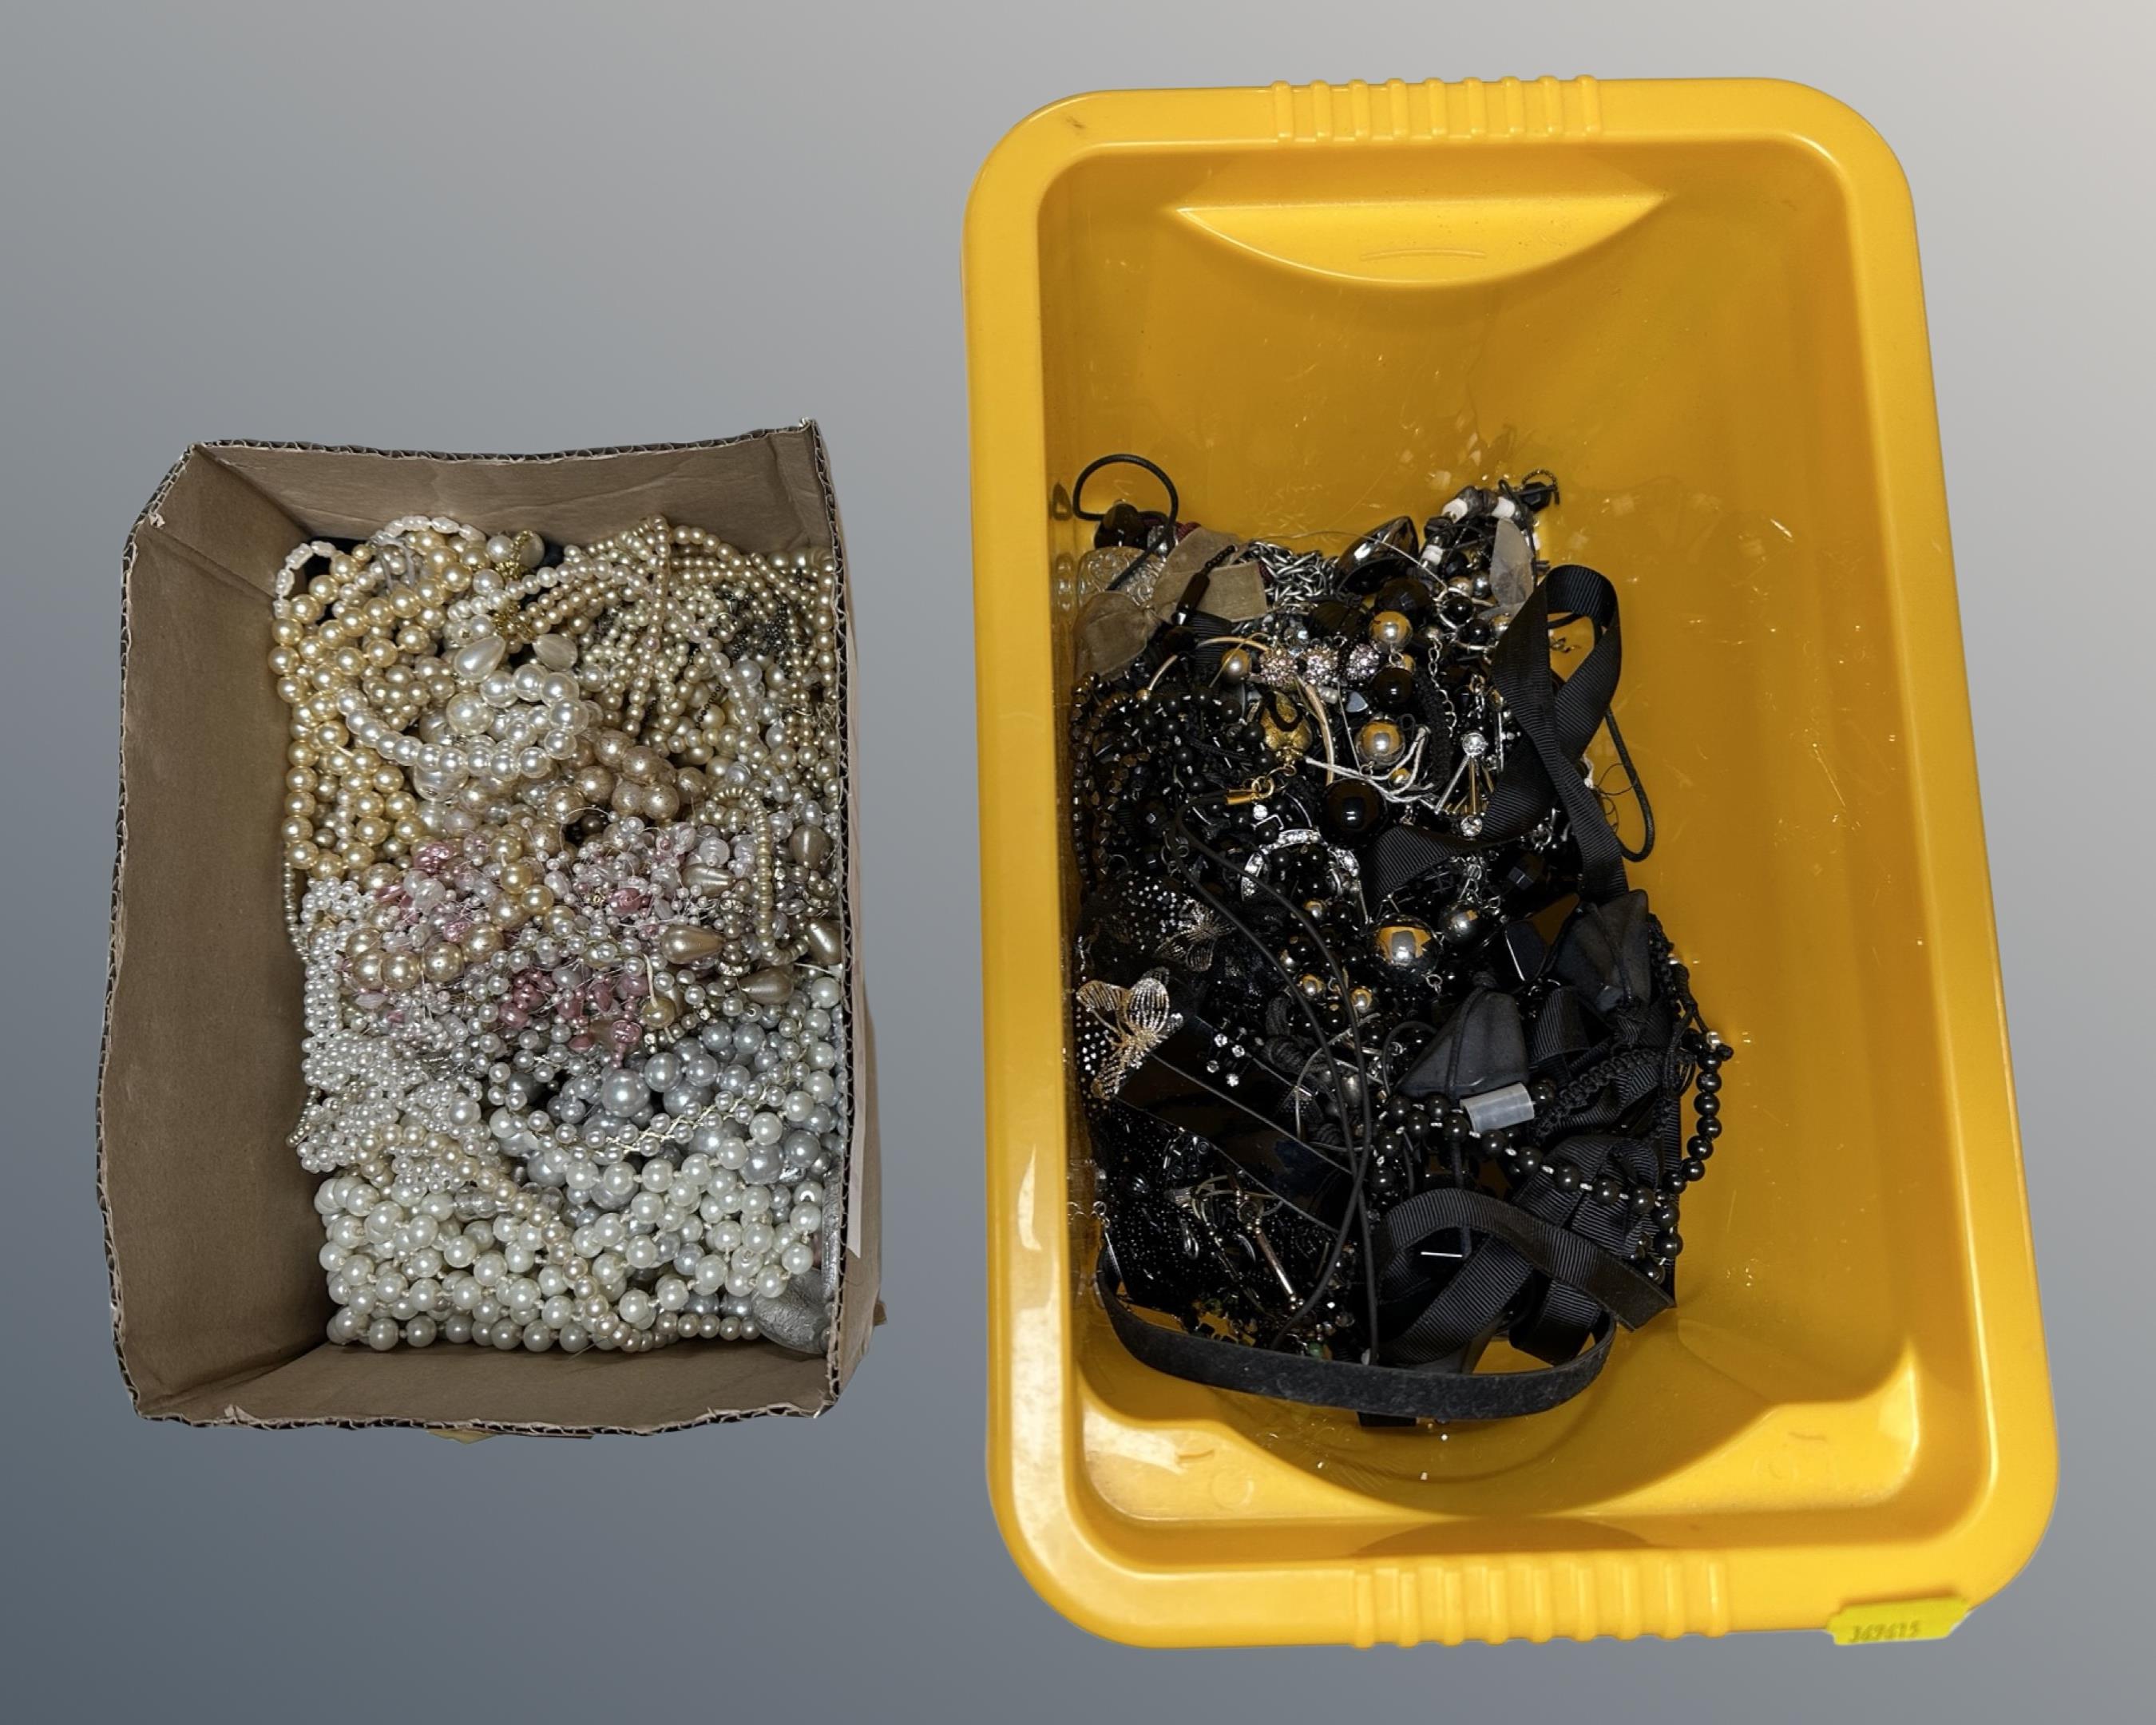 A plastic tub and a box containing costume pearls, black bead costume jewellery etc.